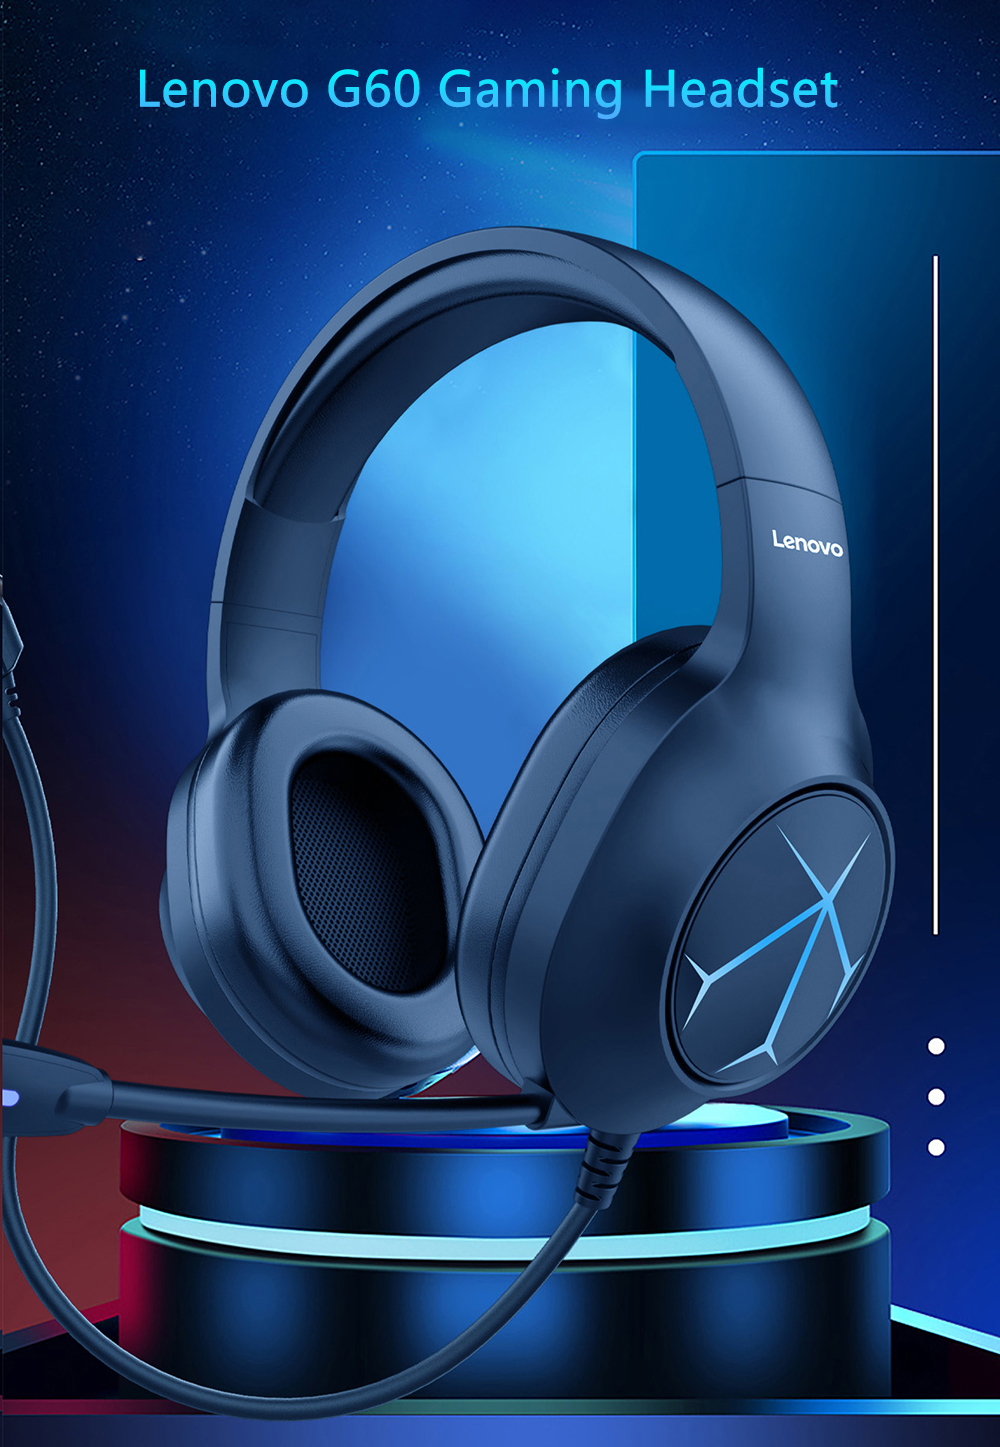 Lenovo-G60-Wired-Gaming-Headset-71-Stereo-Blue-Light-Over-Ear-Gaming-Headphone-with-Mic-Noise-Cancel-1900882-1